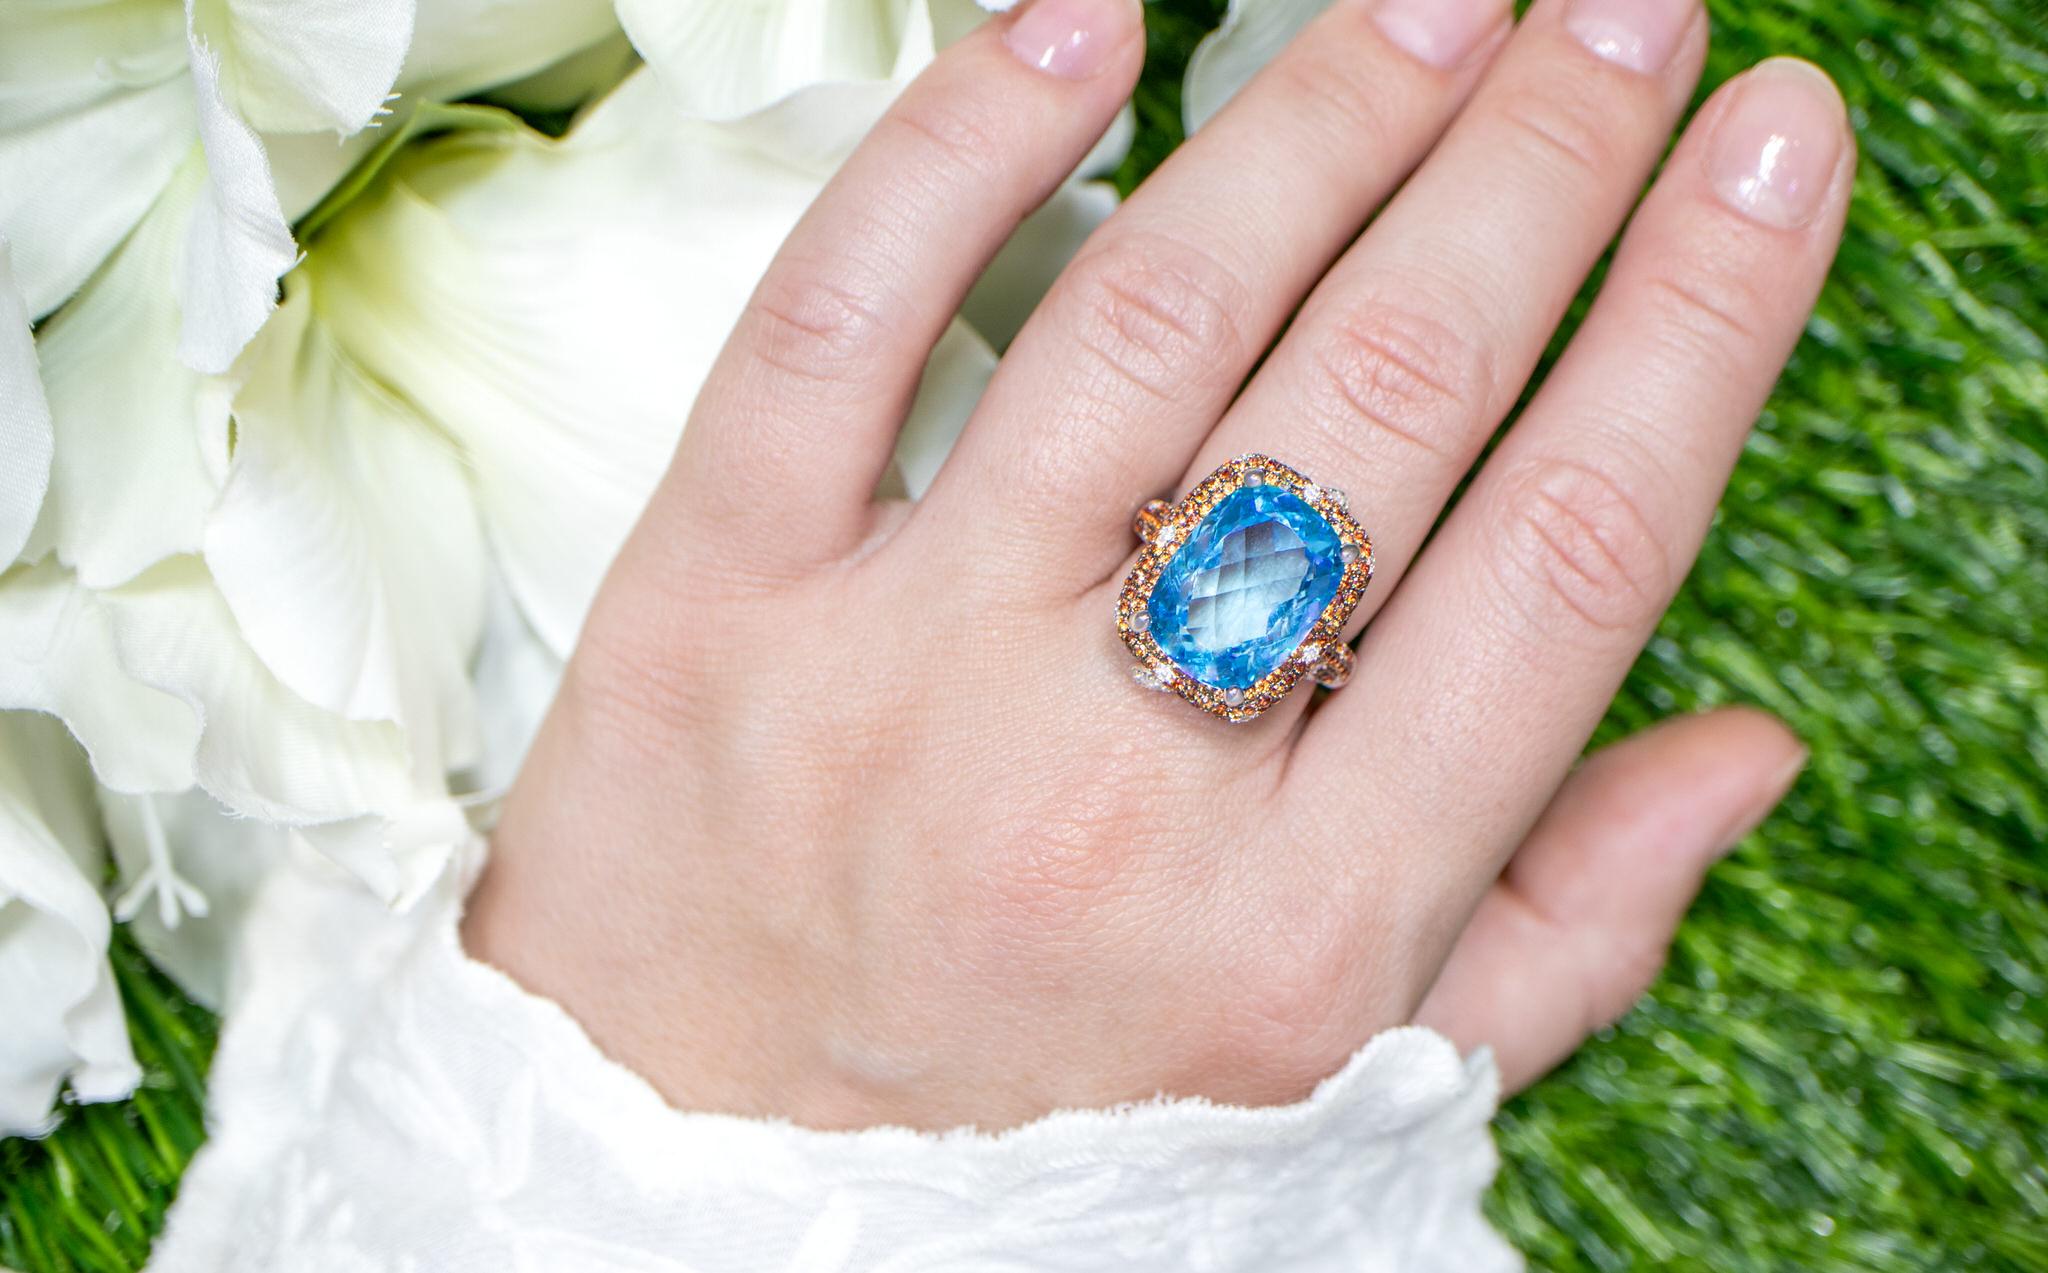 It comes with the Gemological Appraisal by GIA GG/AJP
All Gemstones are Natural
Swiss Blue Topaz = 11.26 Carat
Orange Sapphires = 1.64 Carats
Diamonds = 0.51 Carats
Metal: 18K White Gold
Ring Size: 7* US
*It can be resized complimentary